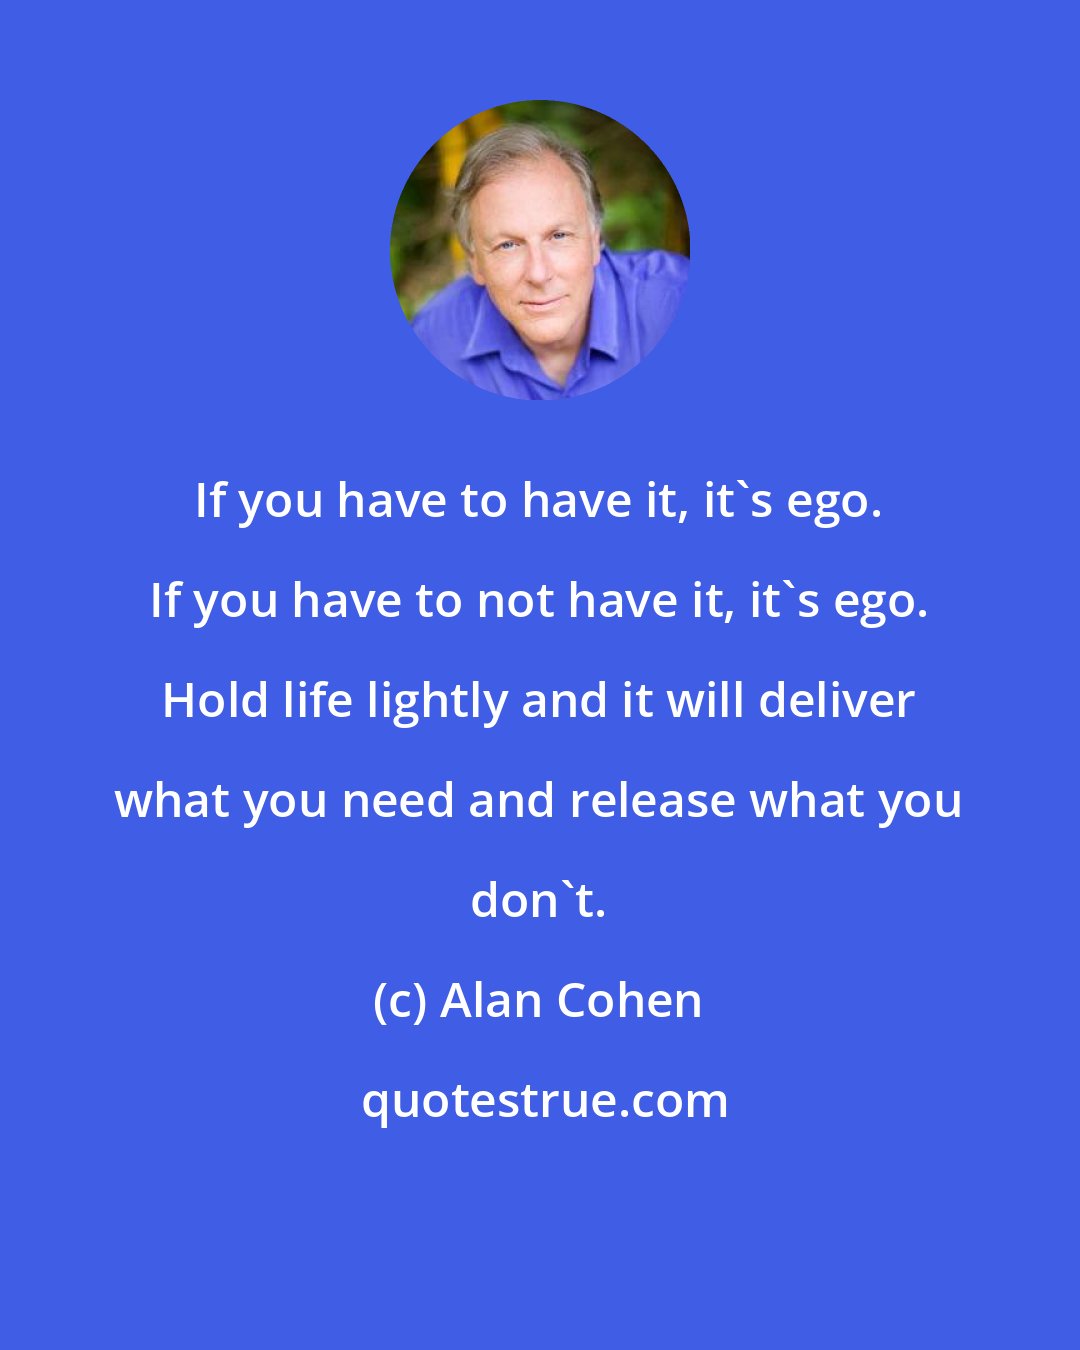 Alan Cohen: If you have to have it, it's ego. If you have to not have it, it's ego. Hold life lightly and it will deliver what you need and release what you don't.